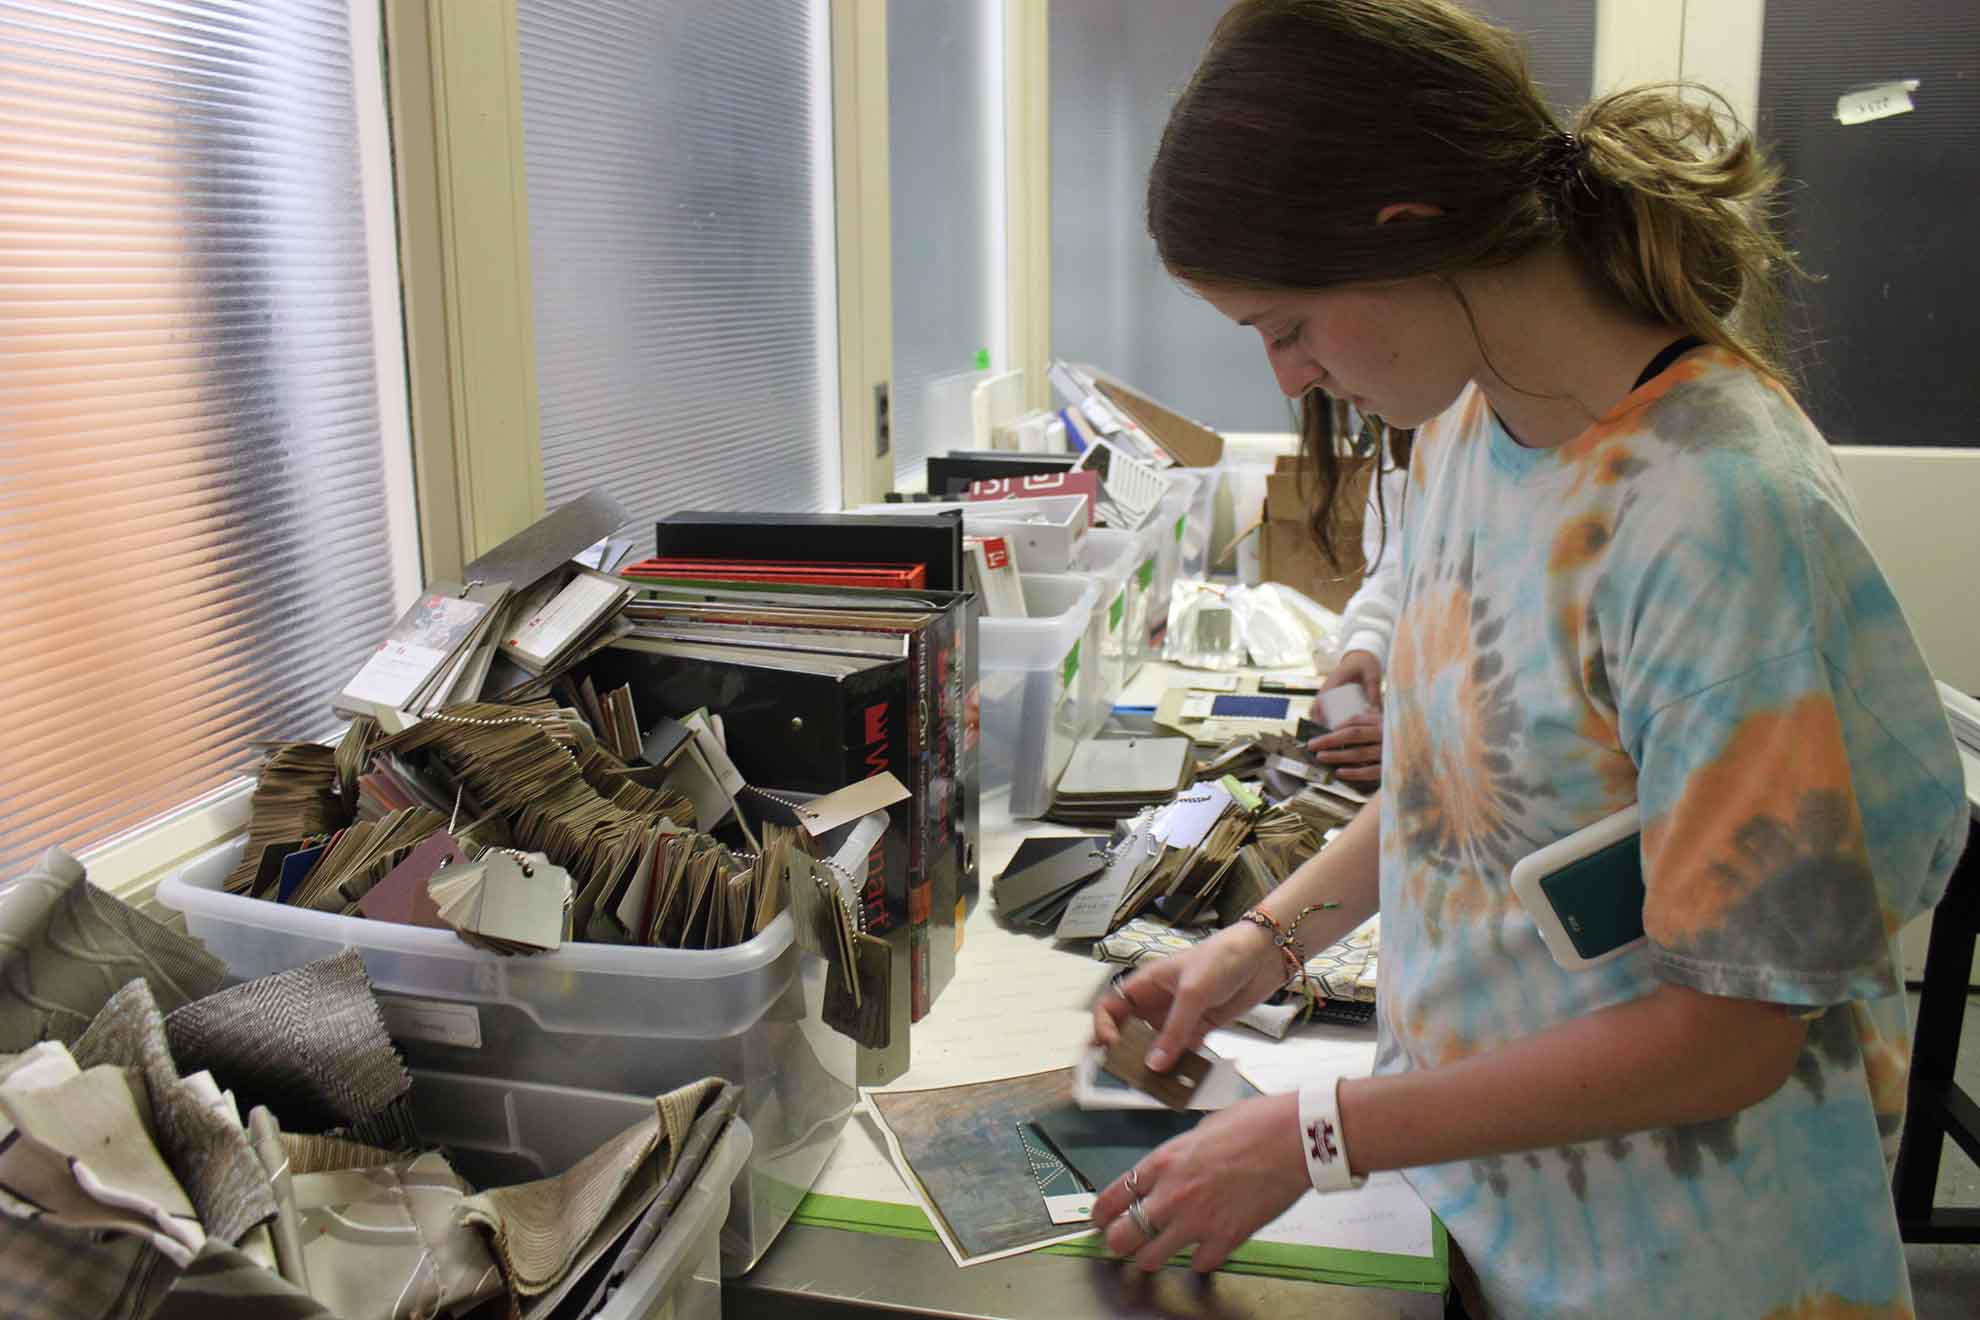 A camper picks materials from the materials library.